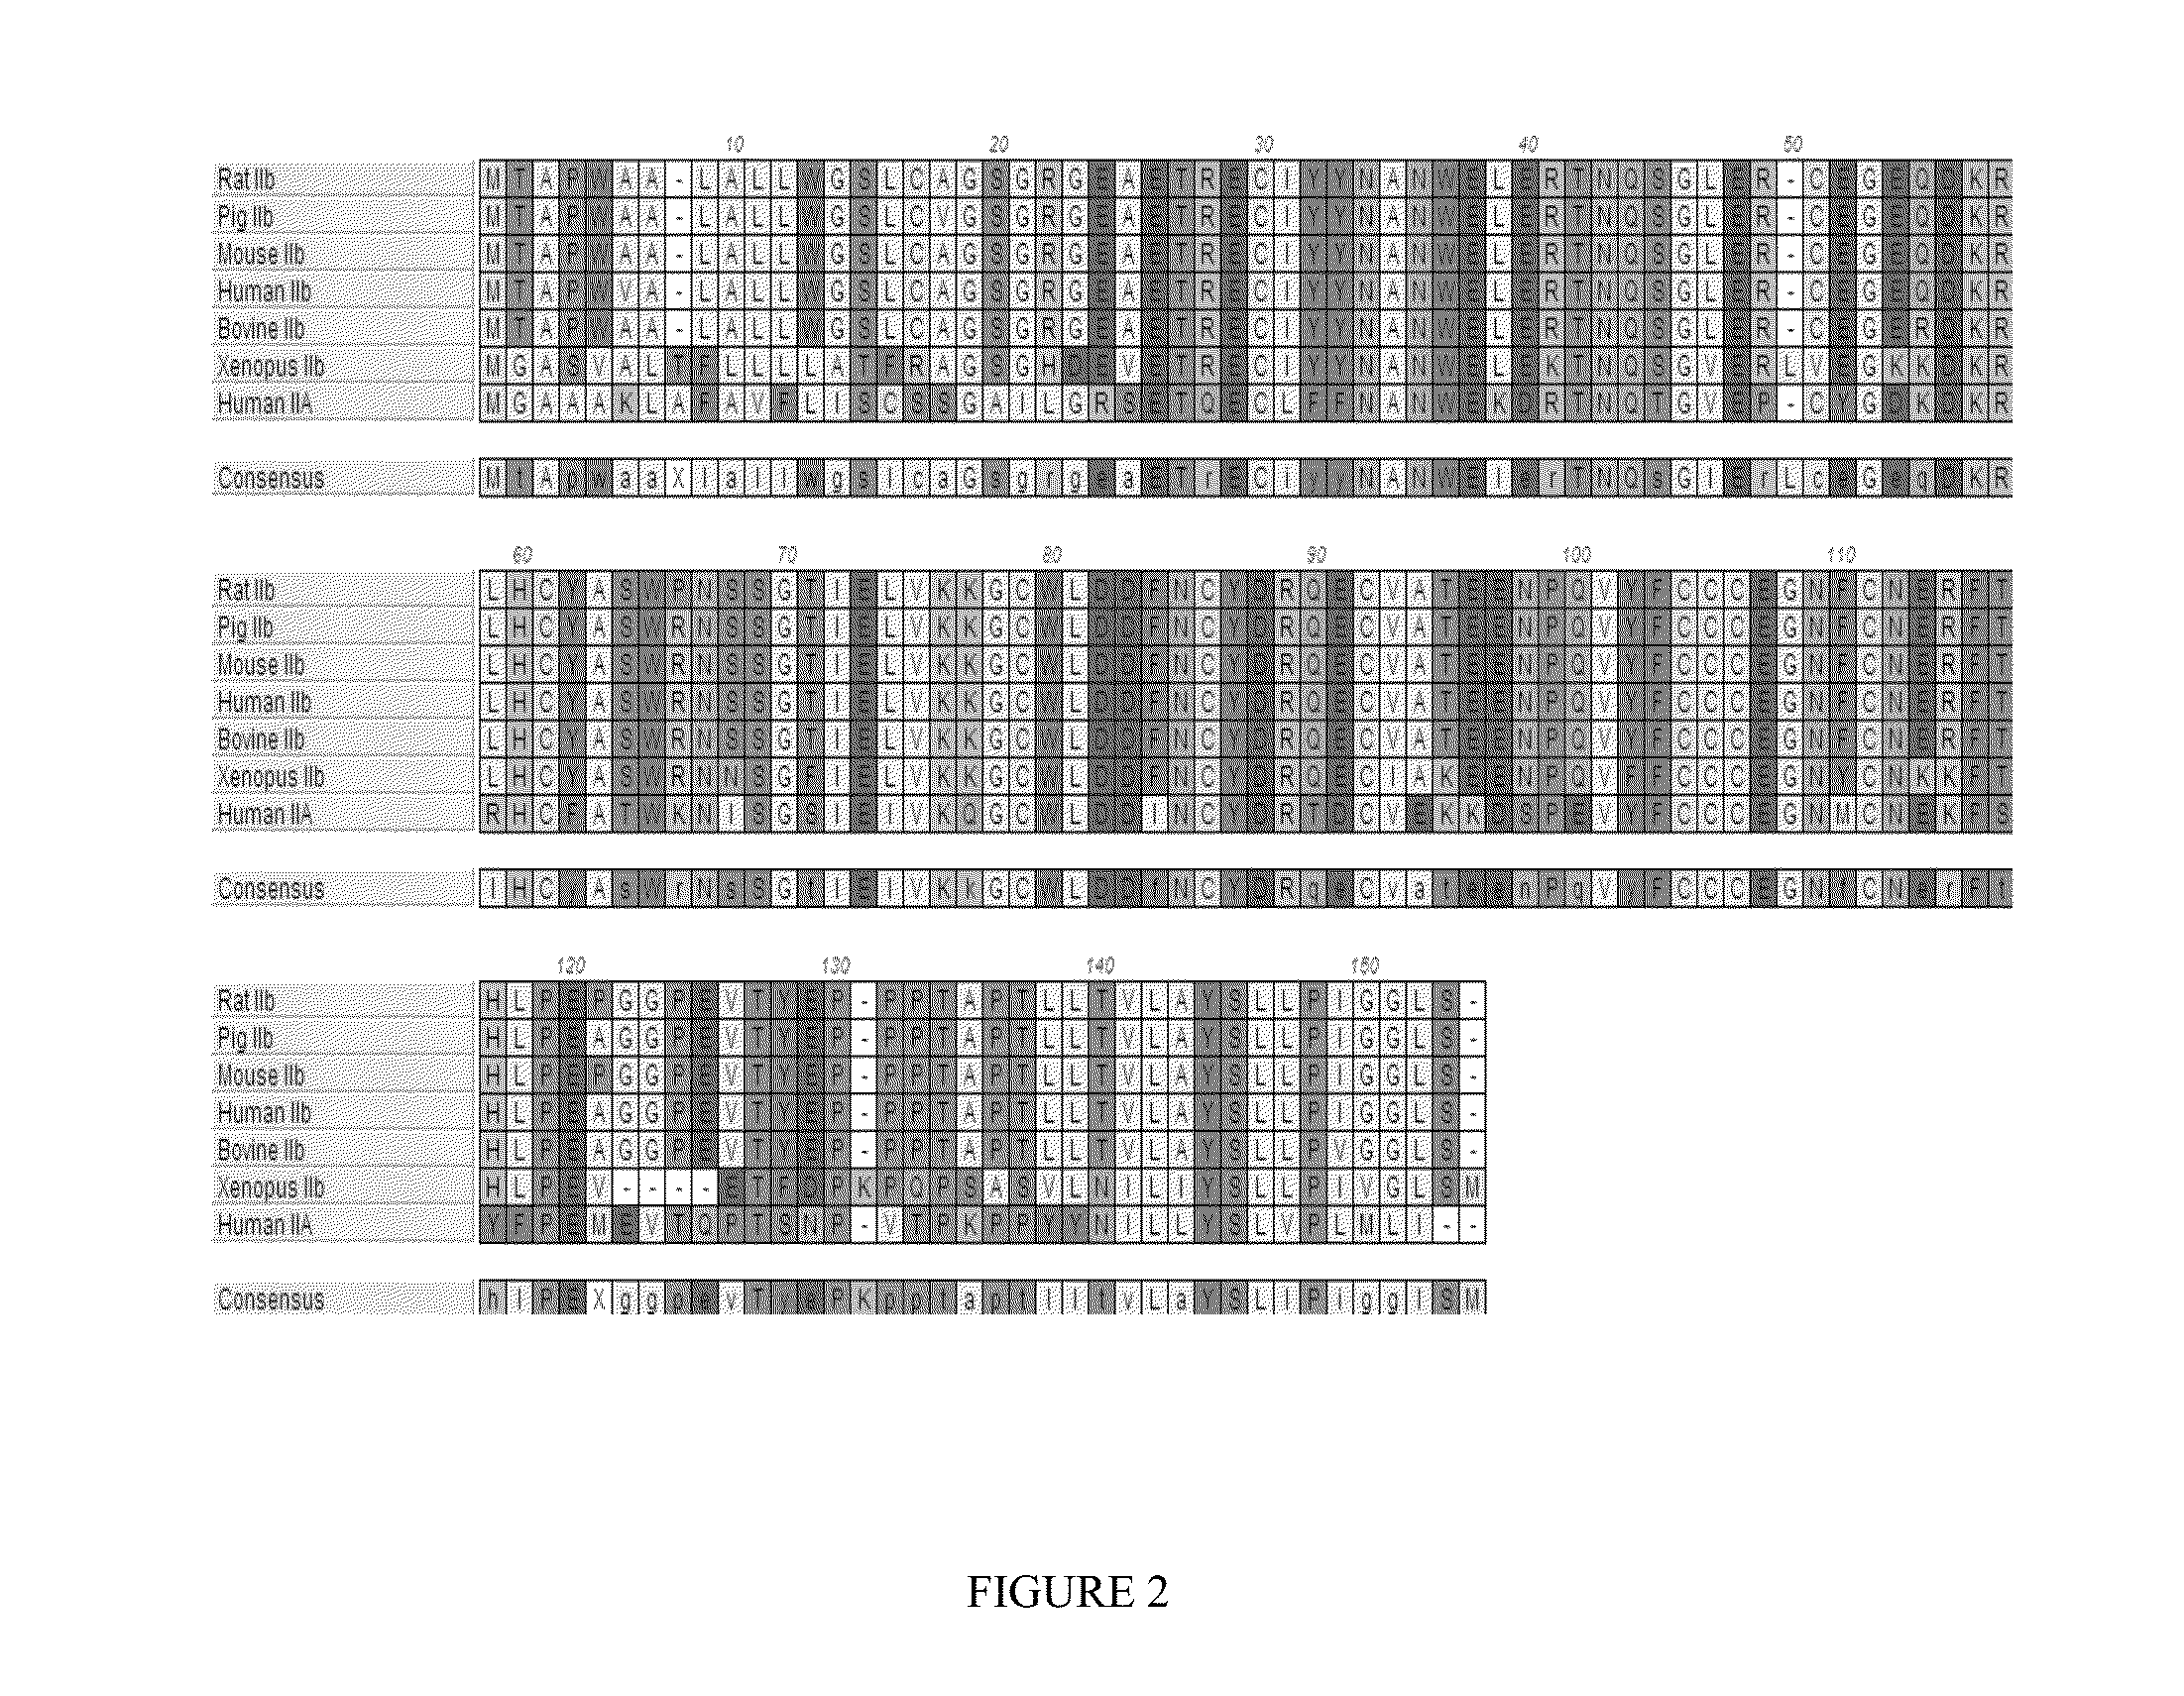 Methods for increasing red blood cell levels and treating ineffective erythropoiesis